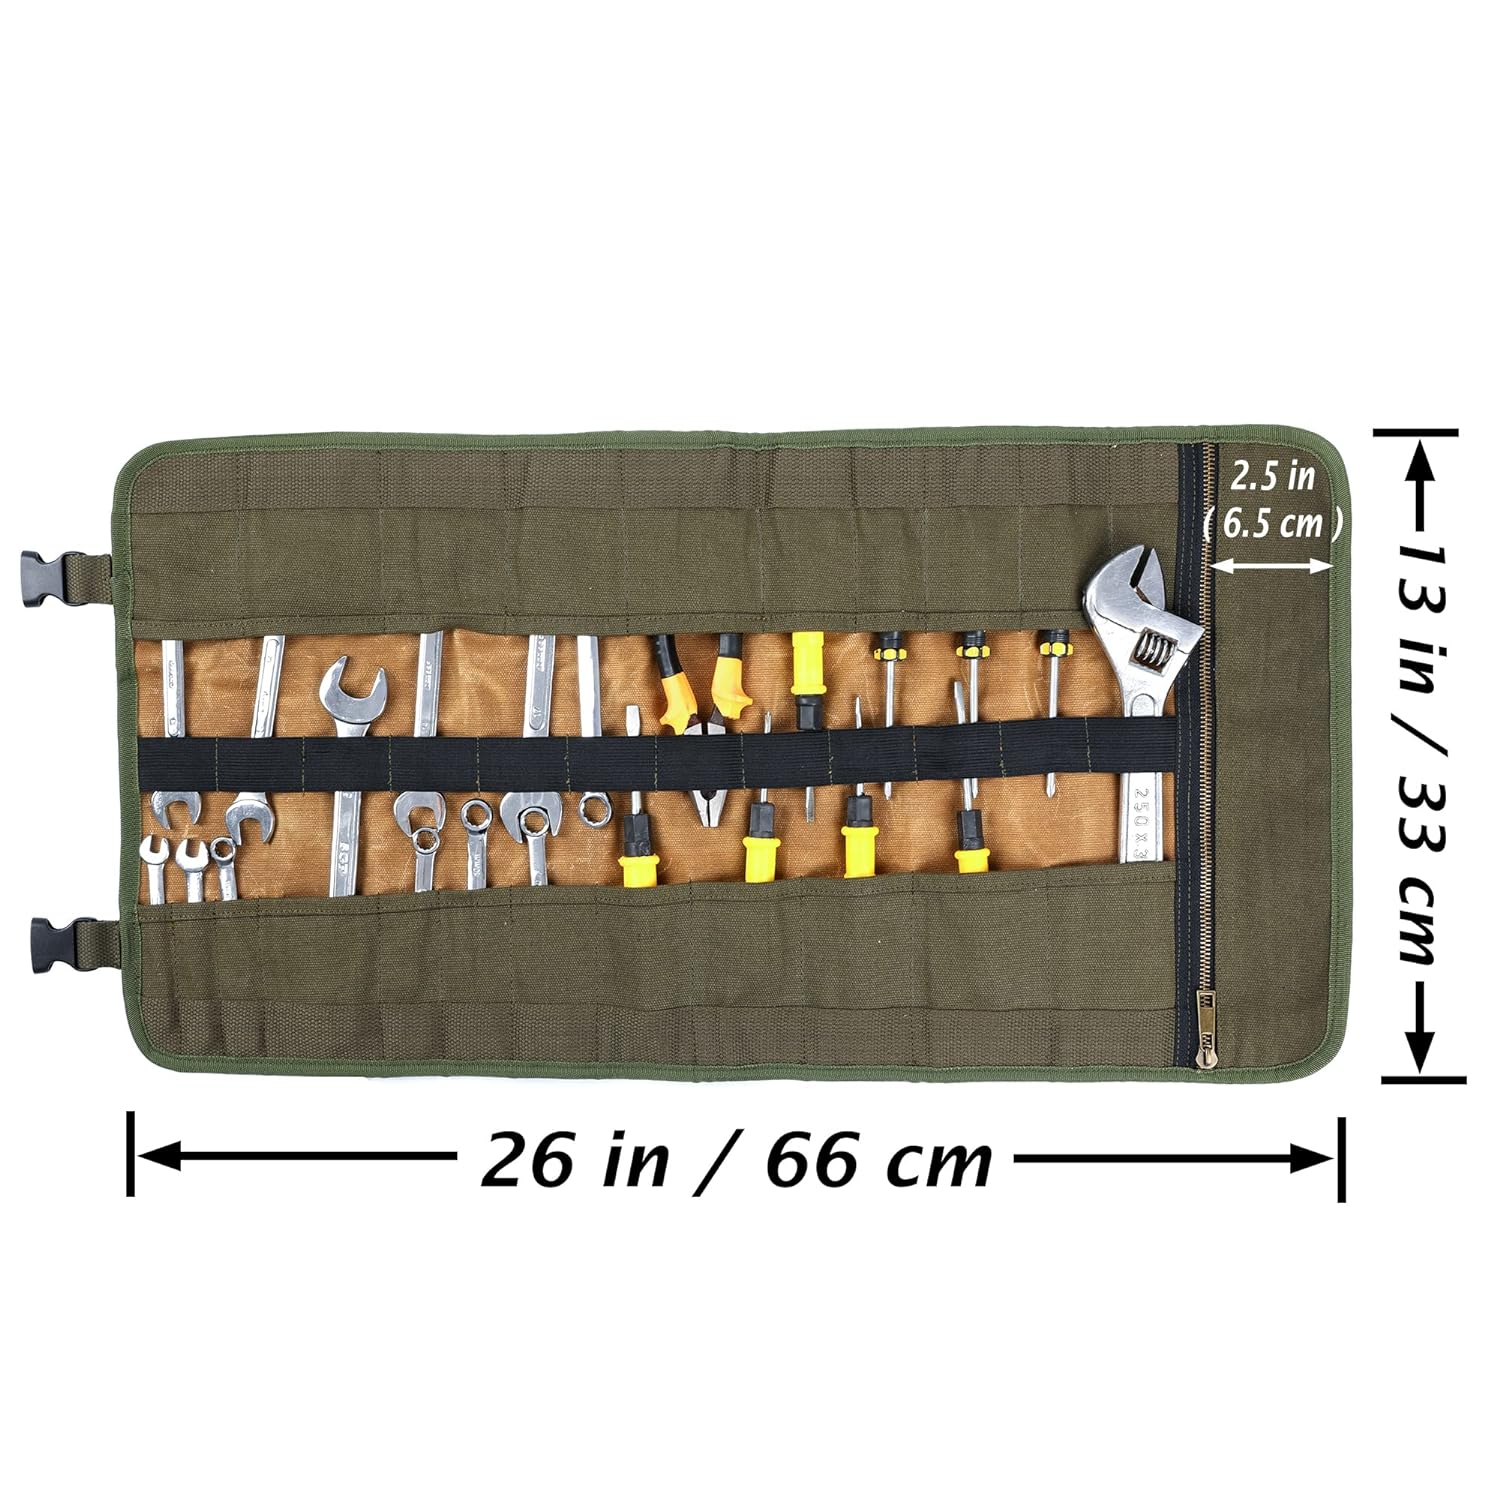 Tool Roll Up Pouch, 16oz Waxed Canvas Tool Roll with Handle, 23 Pockets and 2 Adjustable Buckles Multi-Purpose Tool Organizer Roll (Khaki), Durable Tool Roll